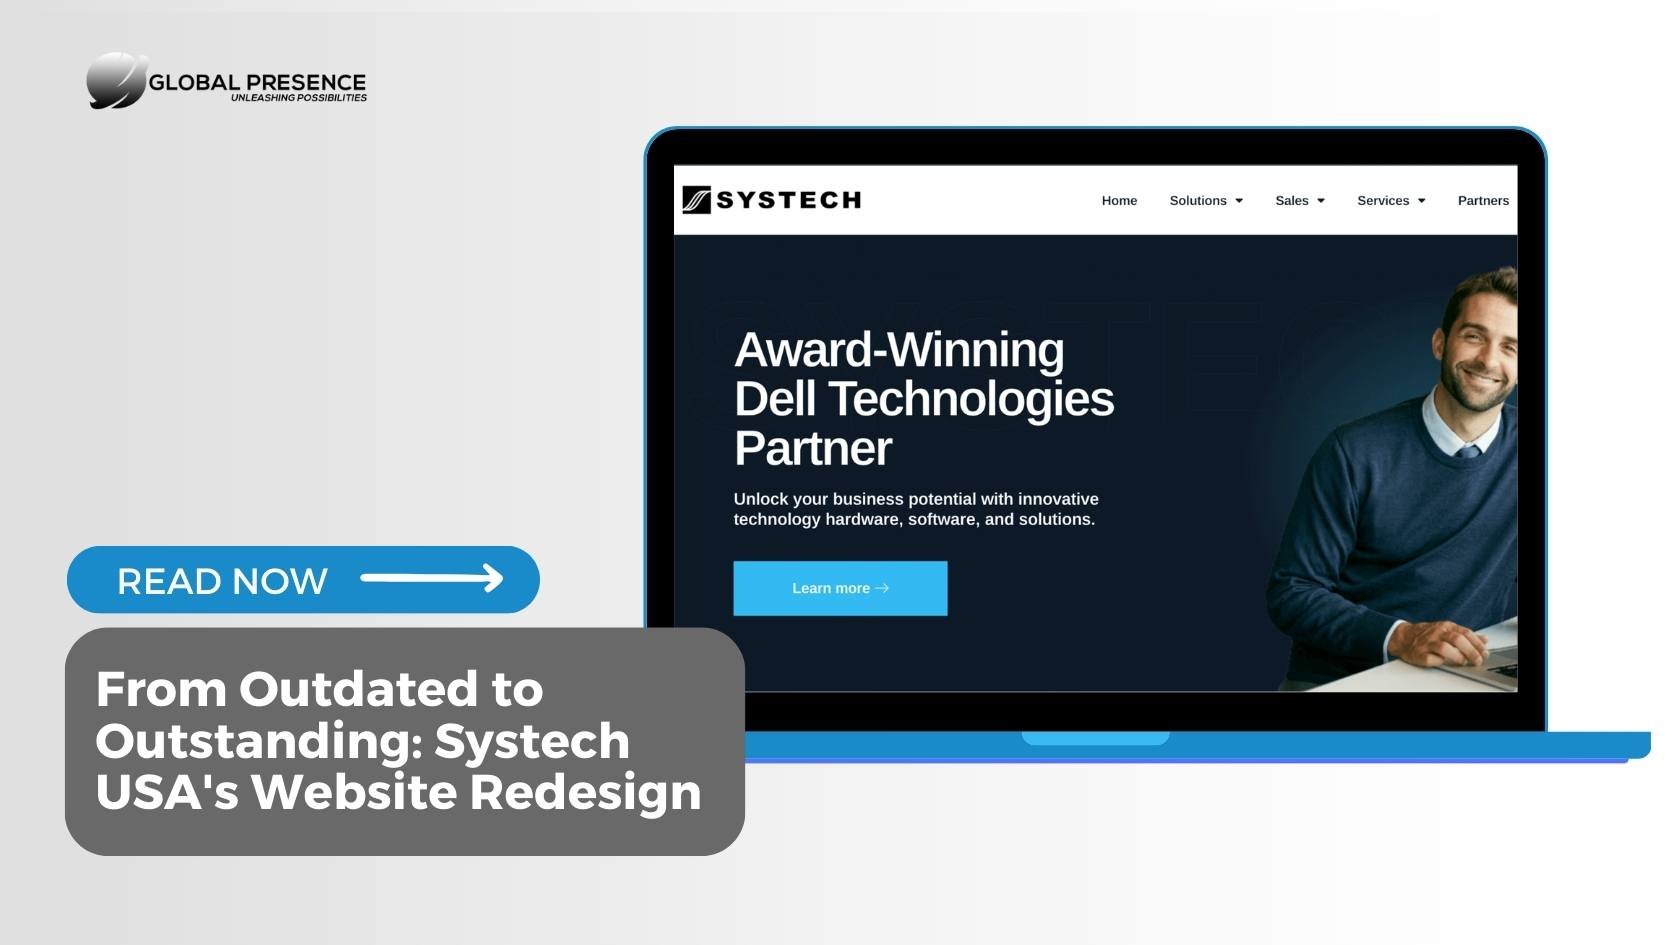 From Outdated to Outstanding: Systech USA's Website Redesign